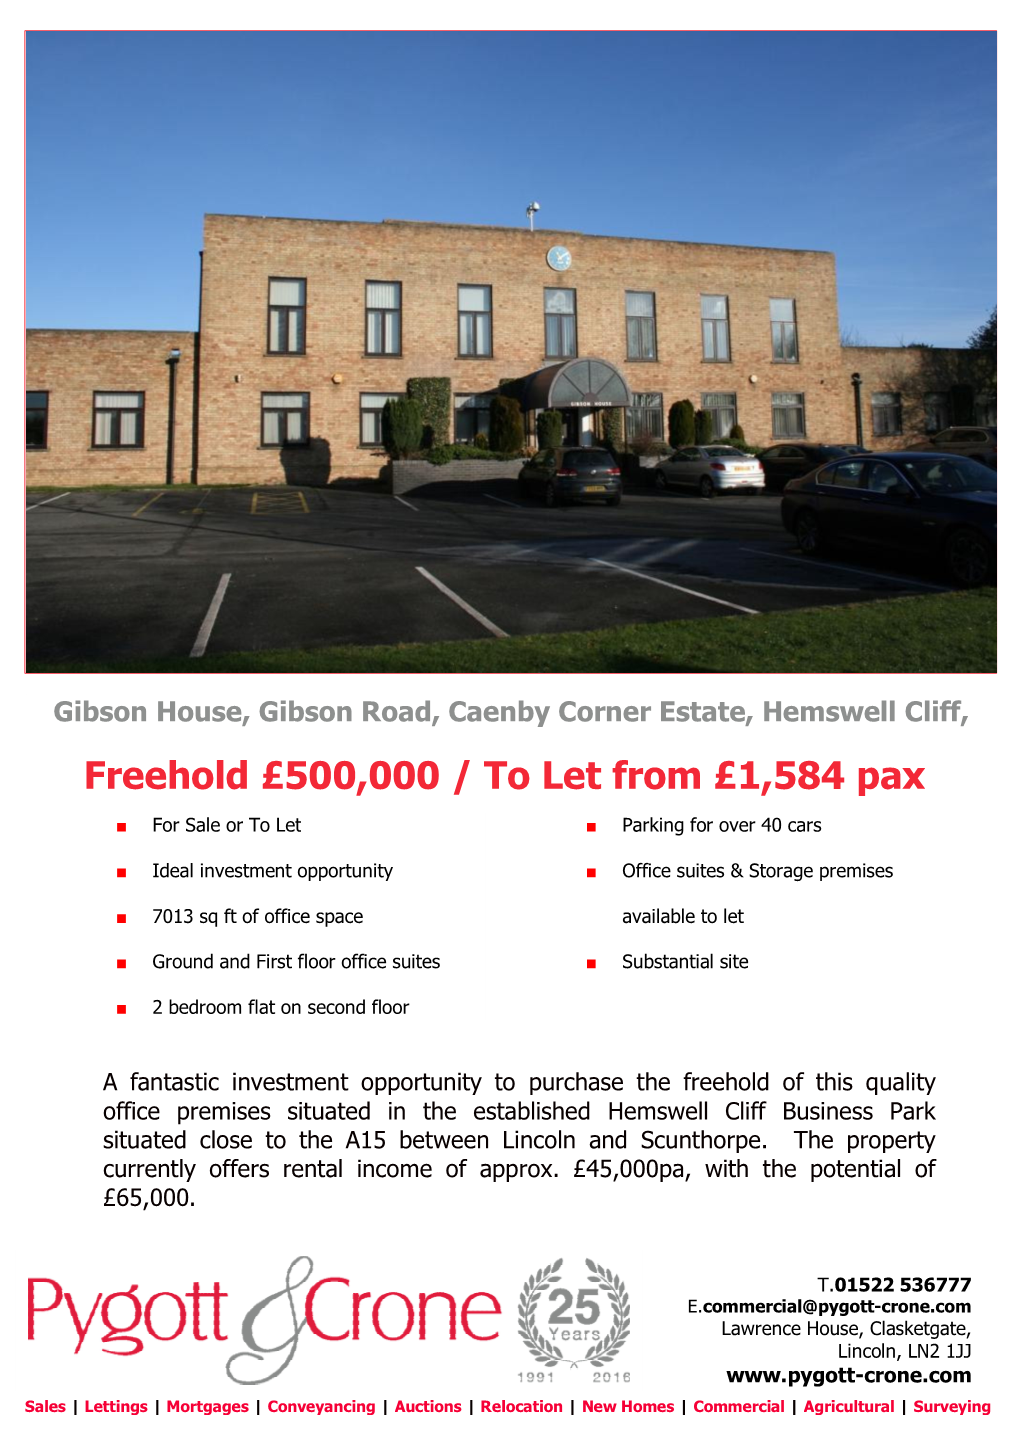 Freehold £500,000 / to Let from £1,584 Pax